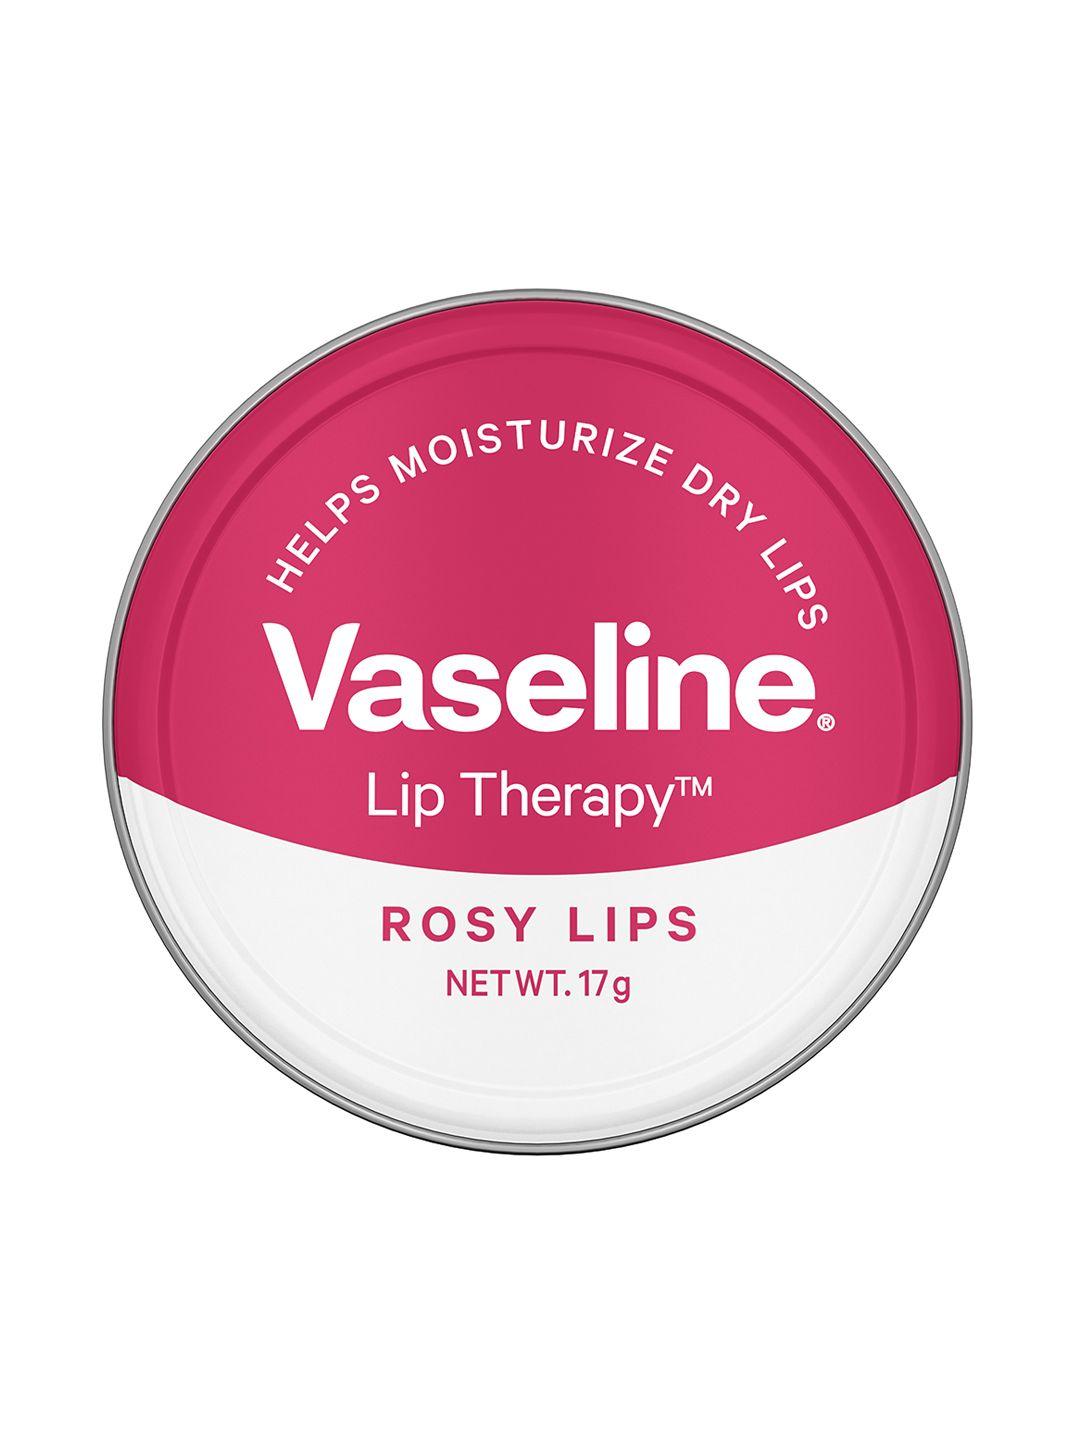 vaseline-lip-therapy-tins-for-moisturised-&-soft-lips-17g---rosy-lips